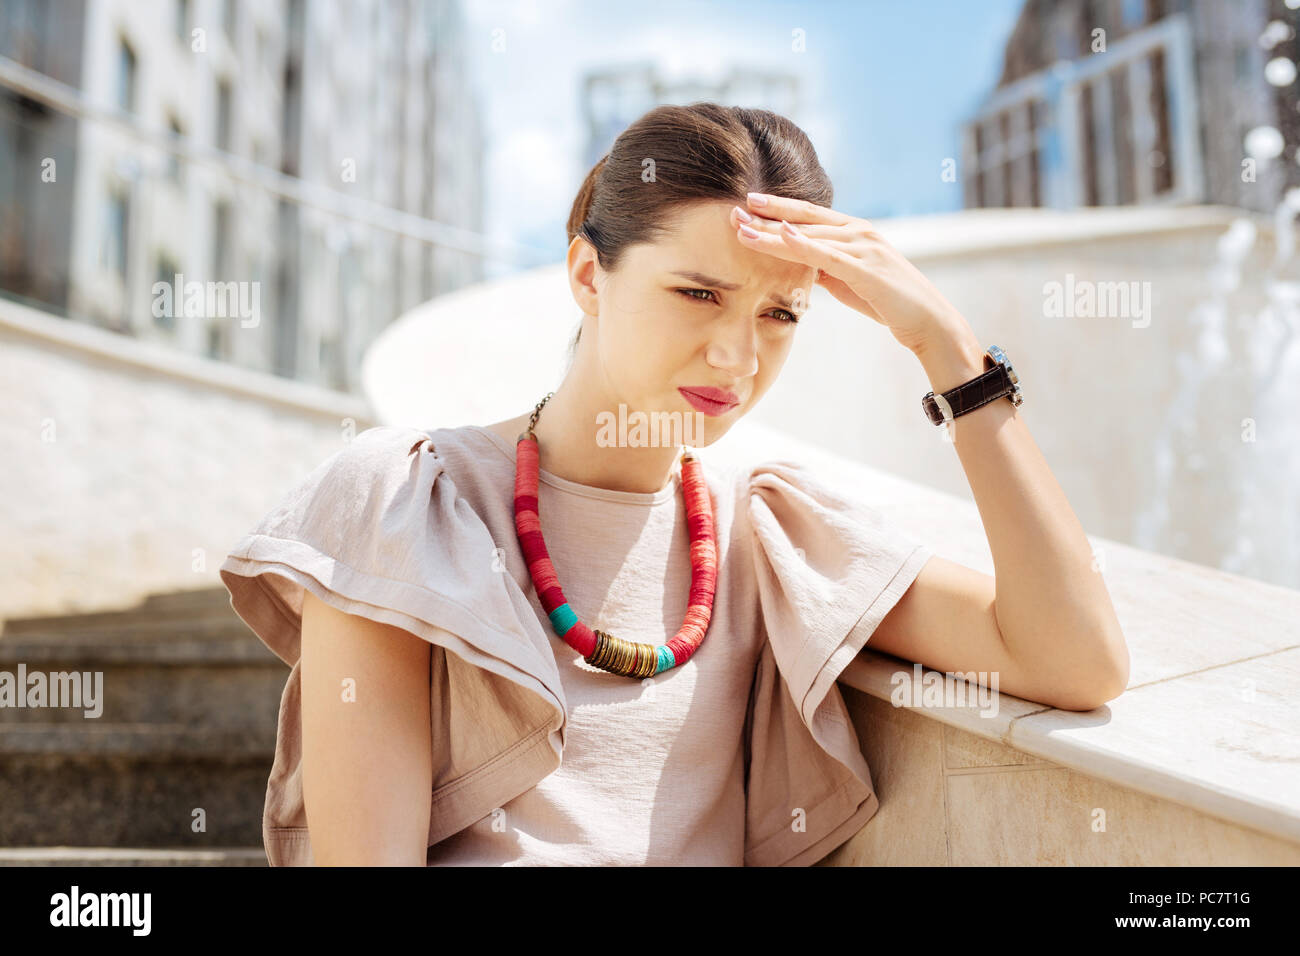 Depressed unhappy woman thinking about her problems Stock Photo